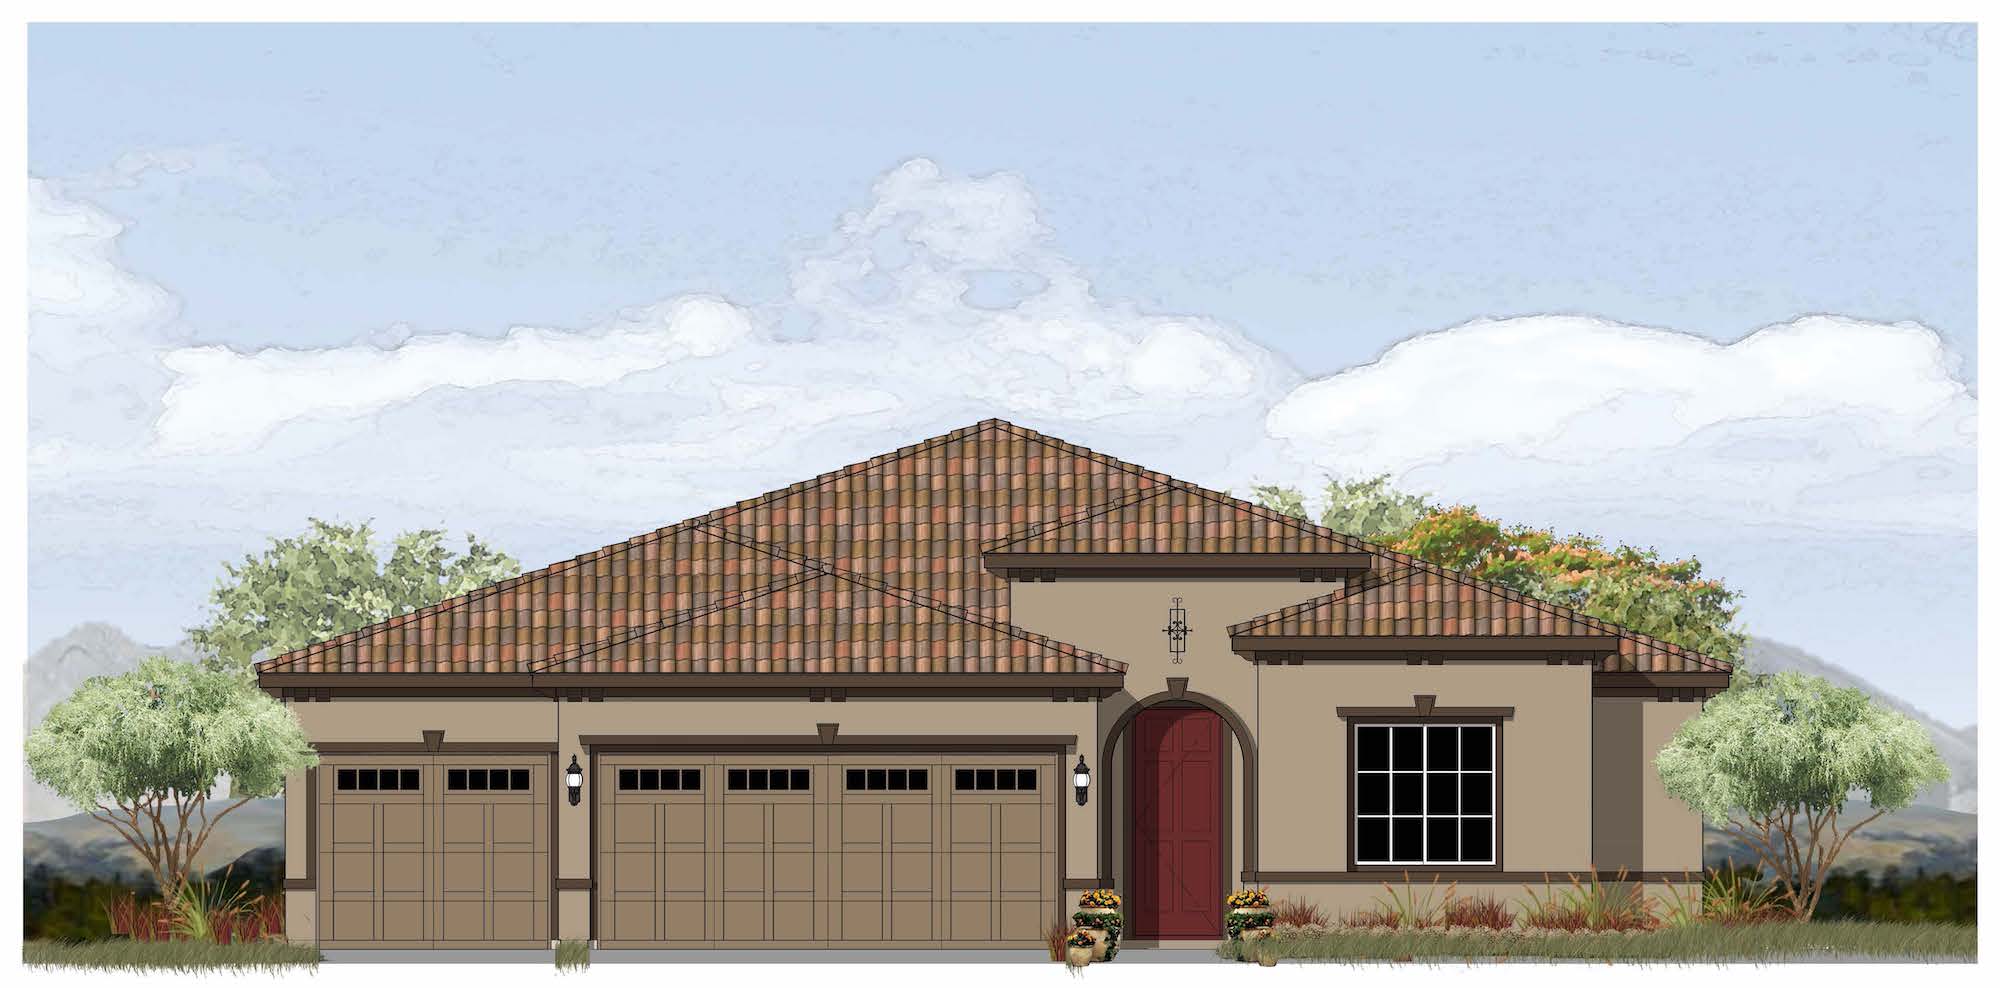 StoryBook Homes, locally owned and operated by principals Wayne and Catherine Laska, will officially break ground on its newest single-family detached housing development in Boulder City on Wednesday, March 21, 2018, at 9 a.m.